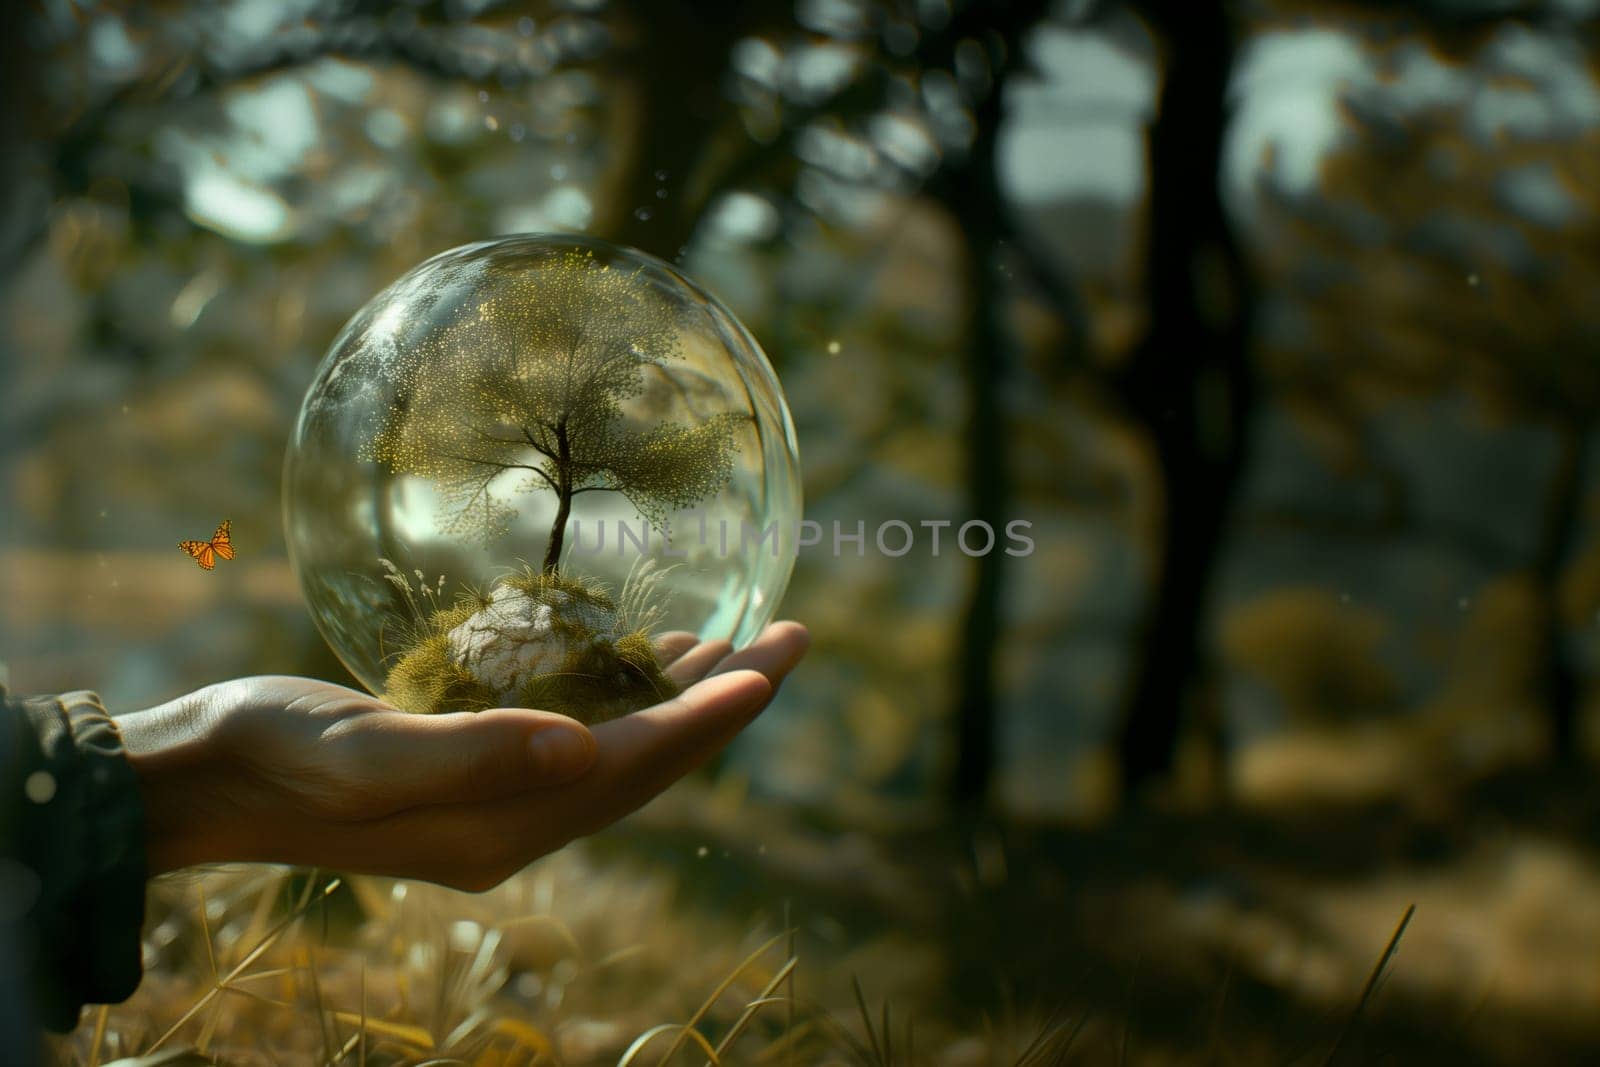 The hand of a young Caucasian unrecognizable man holds in his palm one glass ball with a tree inside it against the backdrop of a blurred forest in the early morning with copy space on the right, side view close-up.